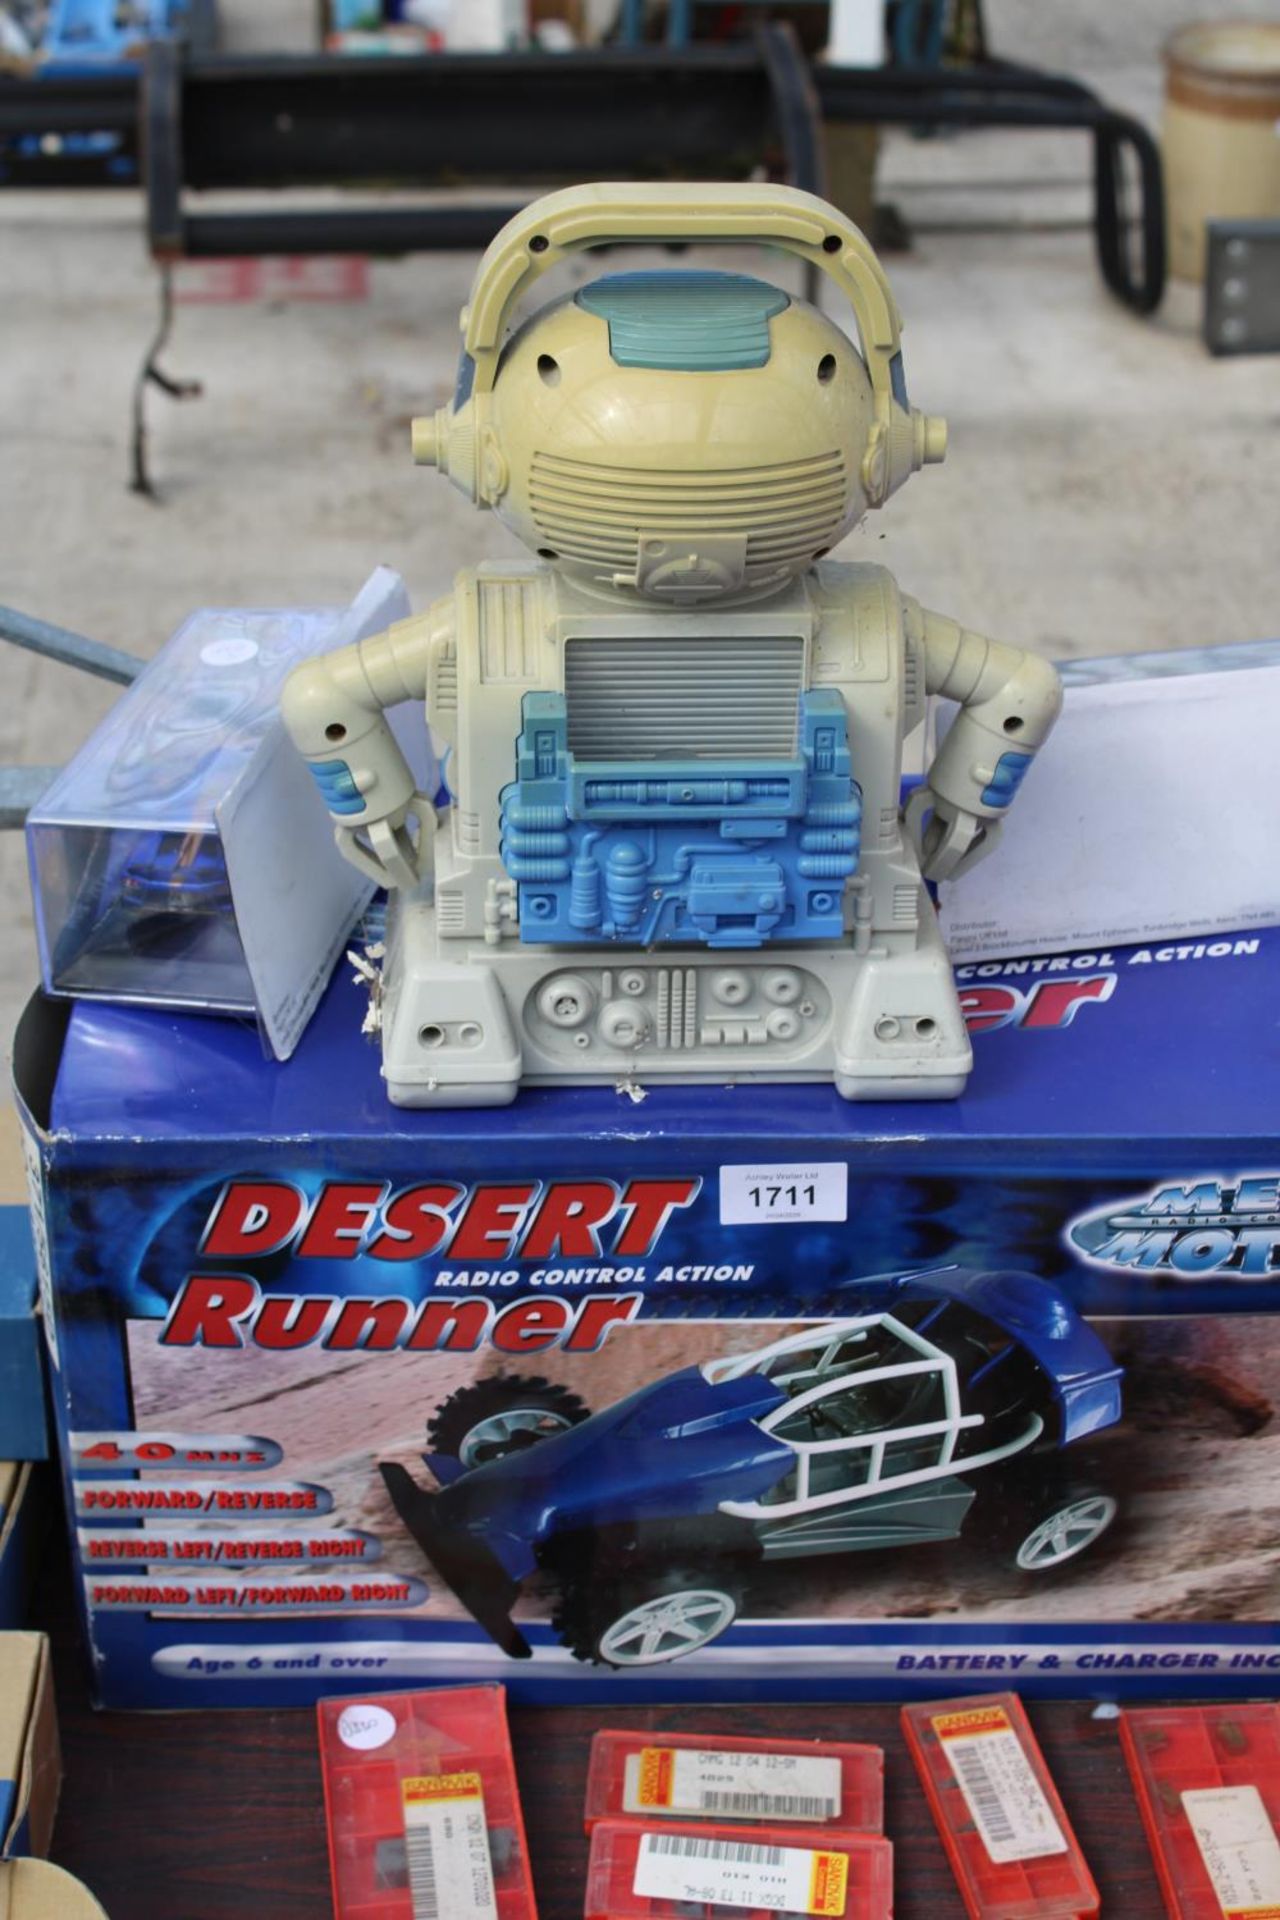 AN ASSORTMENT OF ITEMS TO INCLUDE A DESERT RUNNER VEHICLE, AND A ROBOT ETC - Image 2 of 5